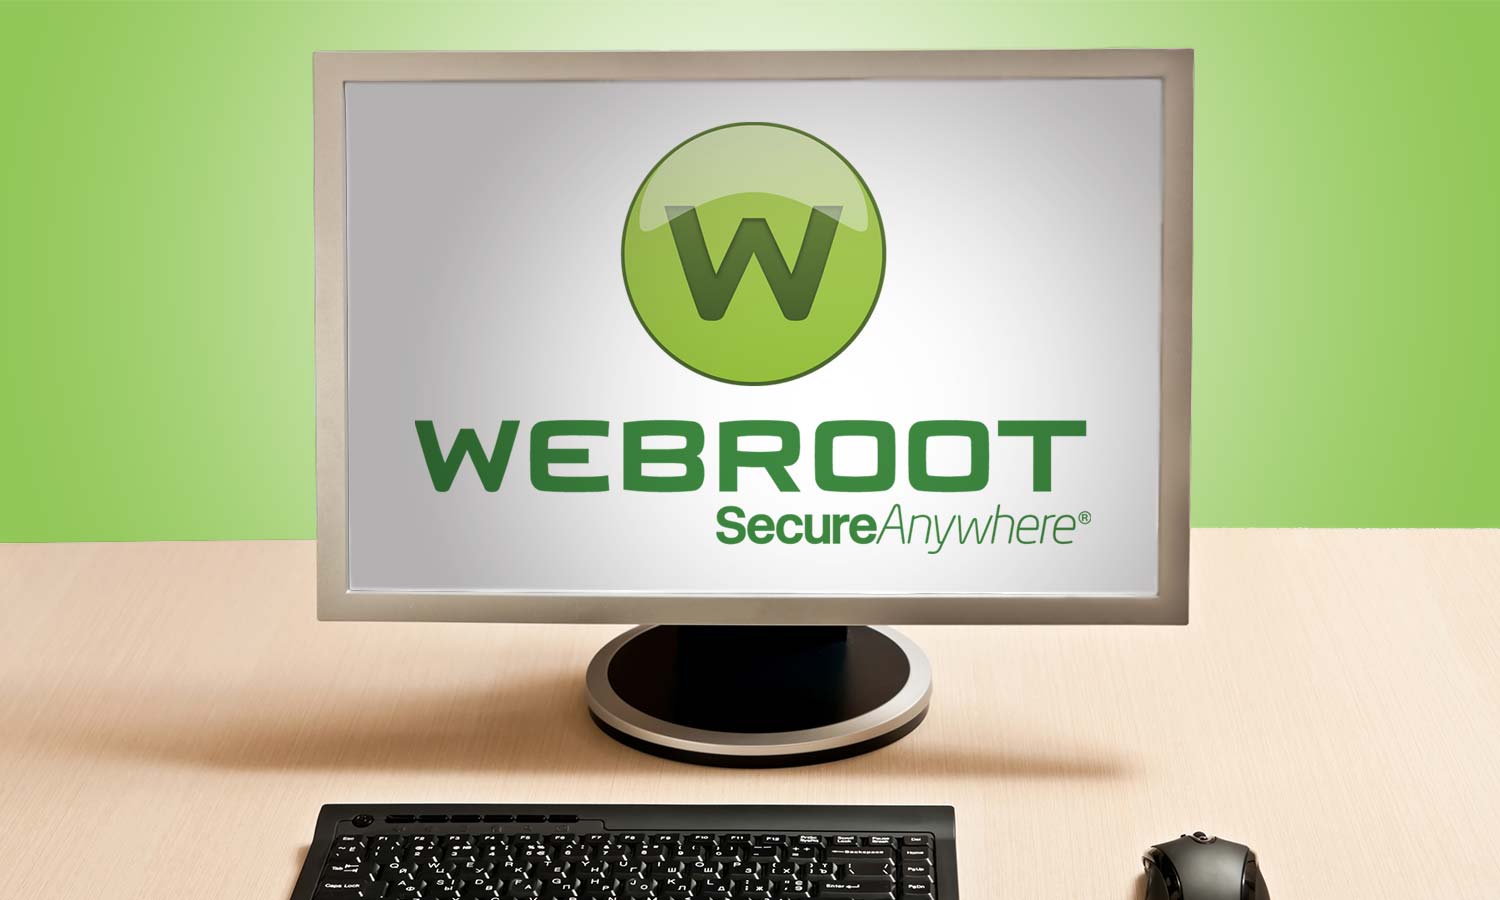 How to Uninstall Webroot SecureAnywhere Completely from Windows 10?